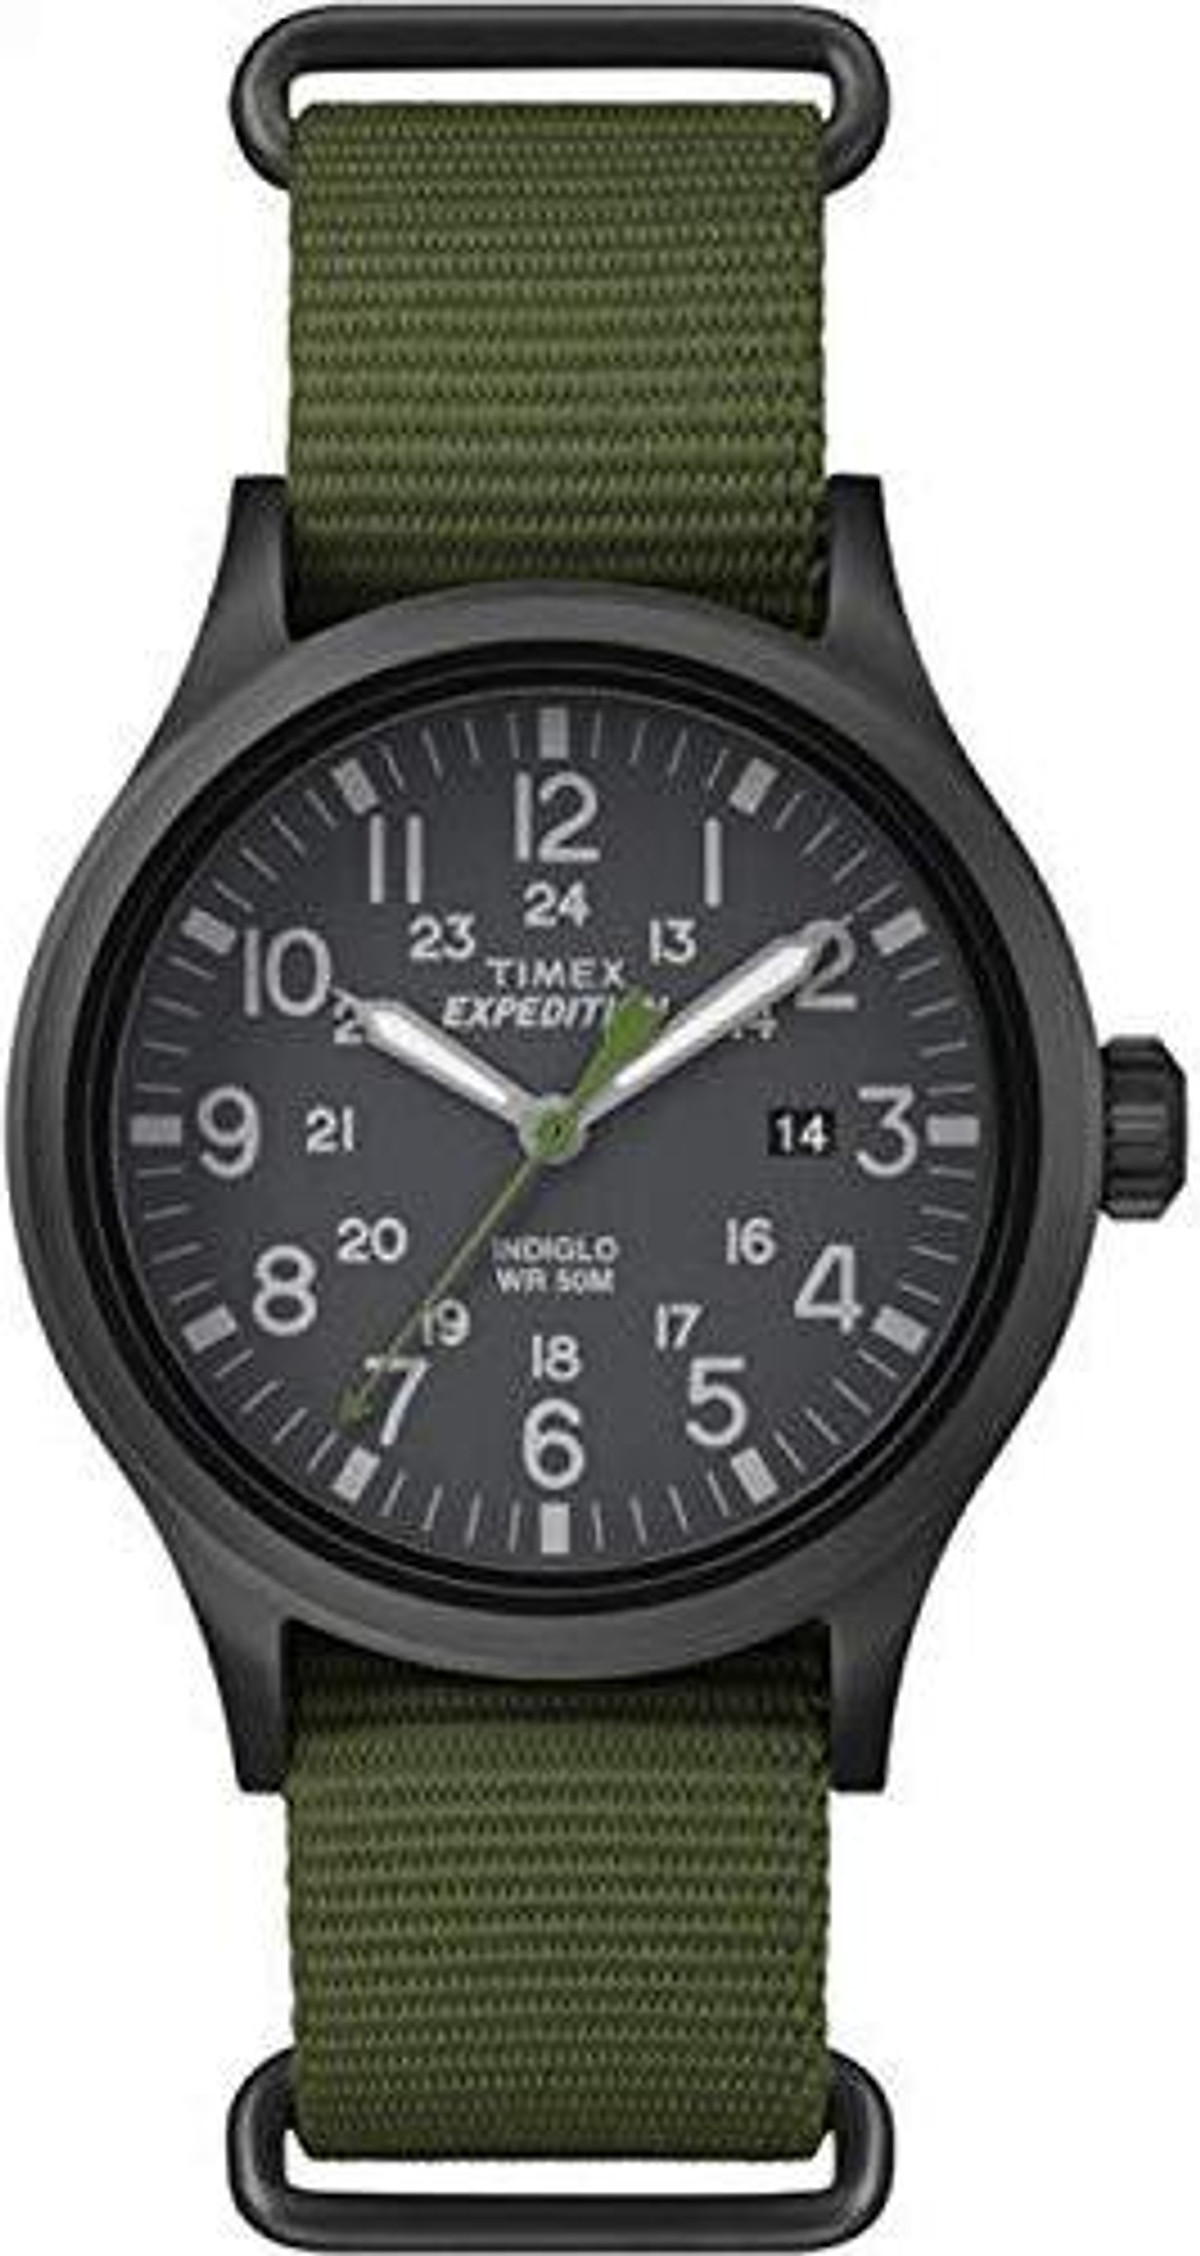 Top 58+ imagen timex expidition